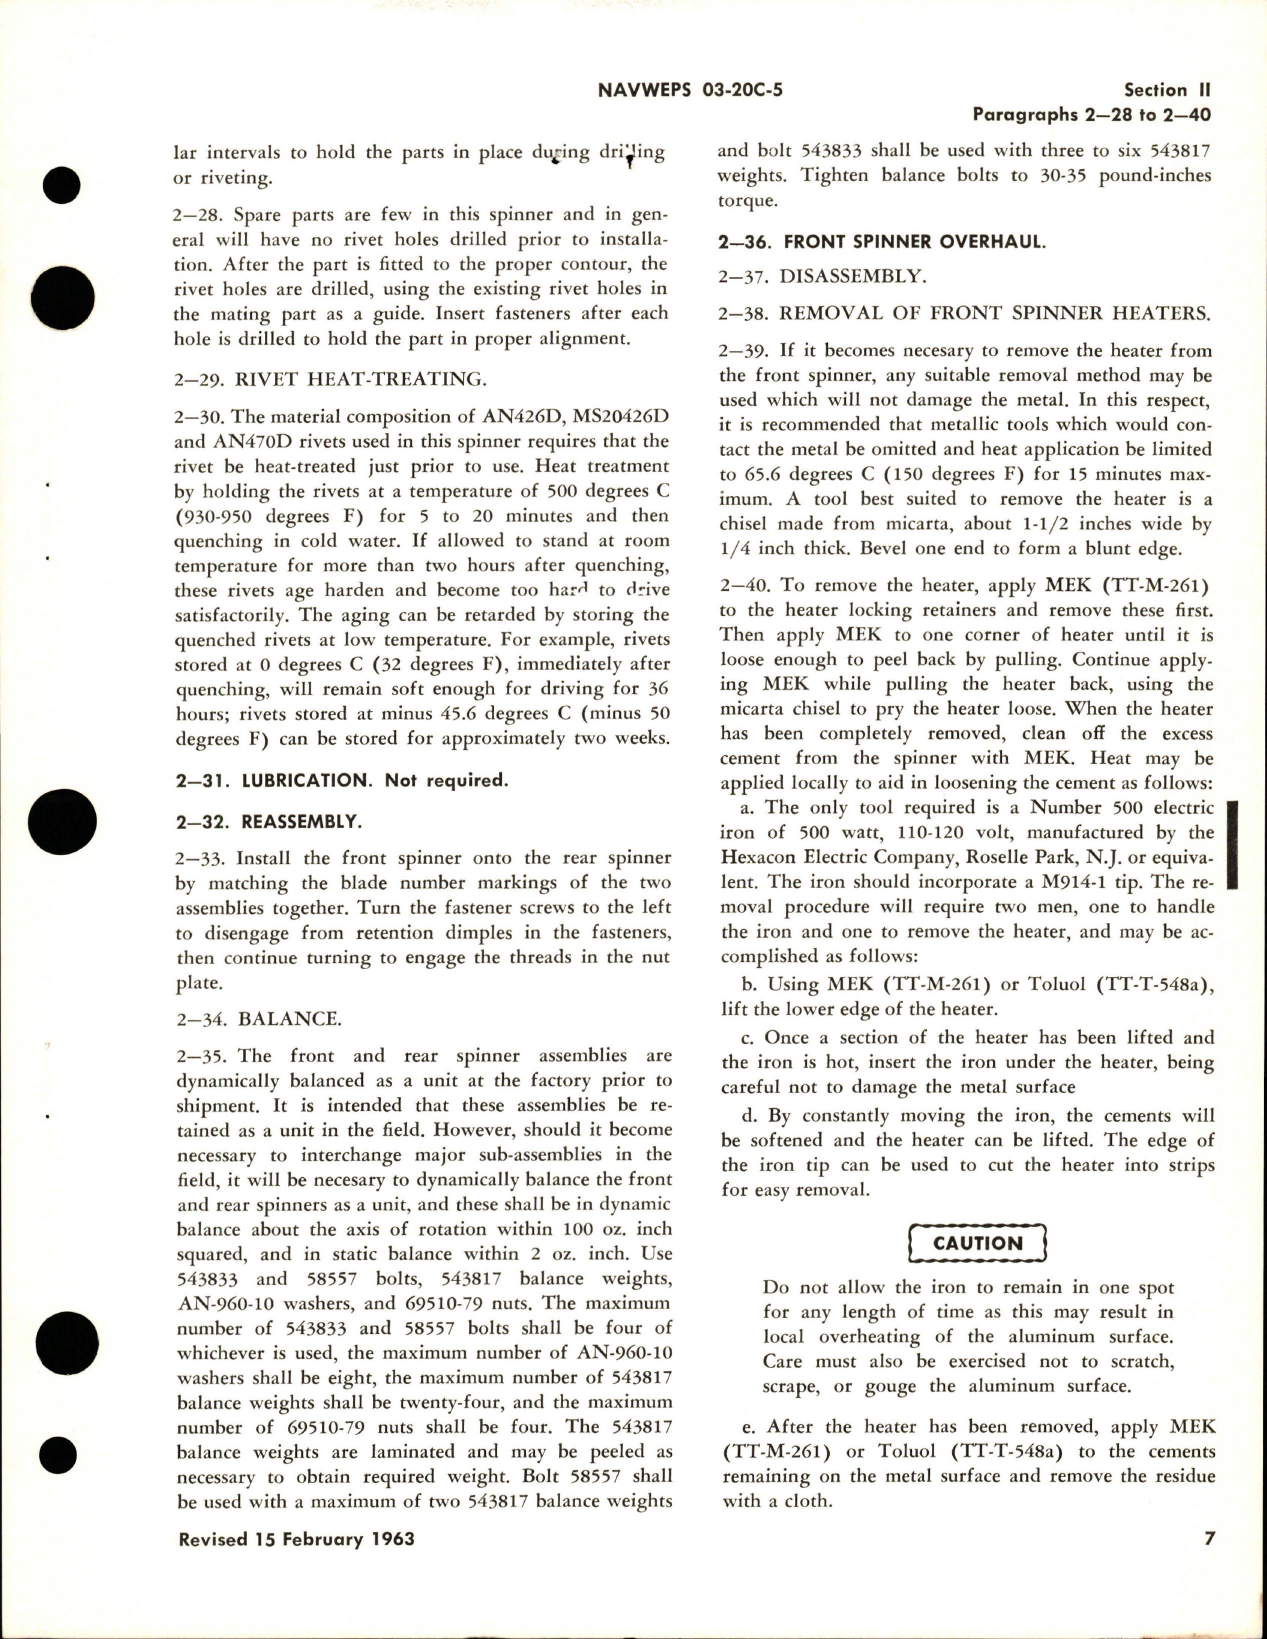 Sample page 5 from AirCorps Library document: Overhaul Instructions for Aircraft Propeller Spinner and Anti-Icing - Assembly 535247